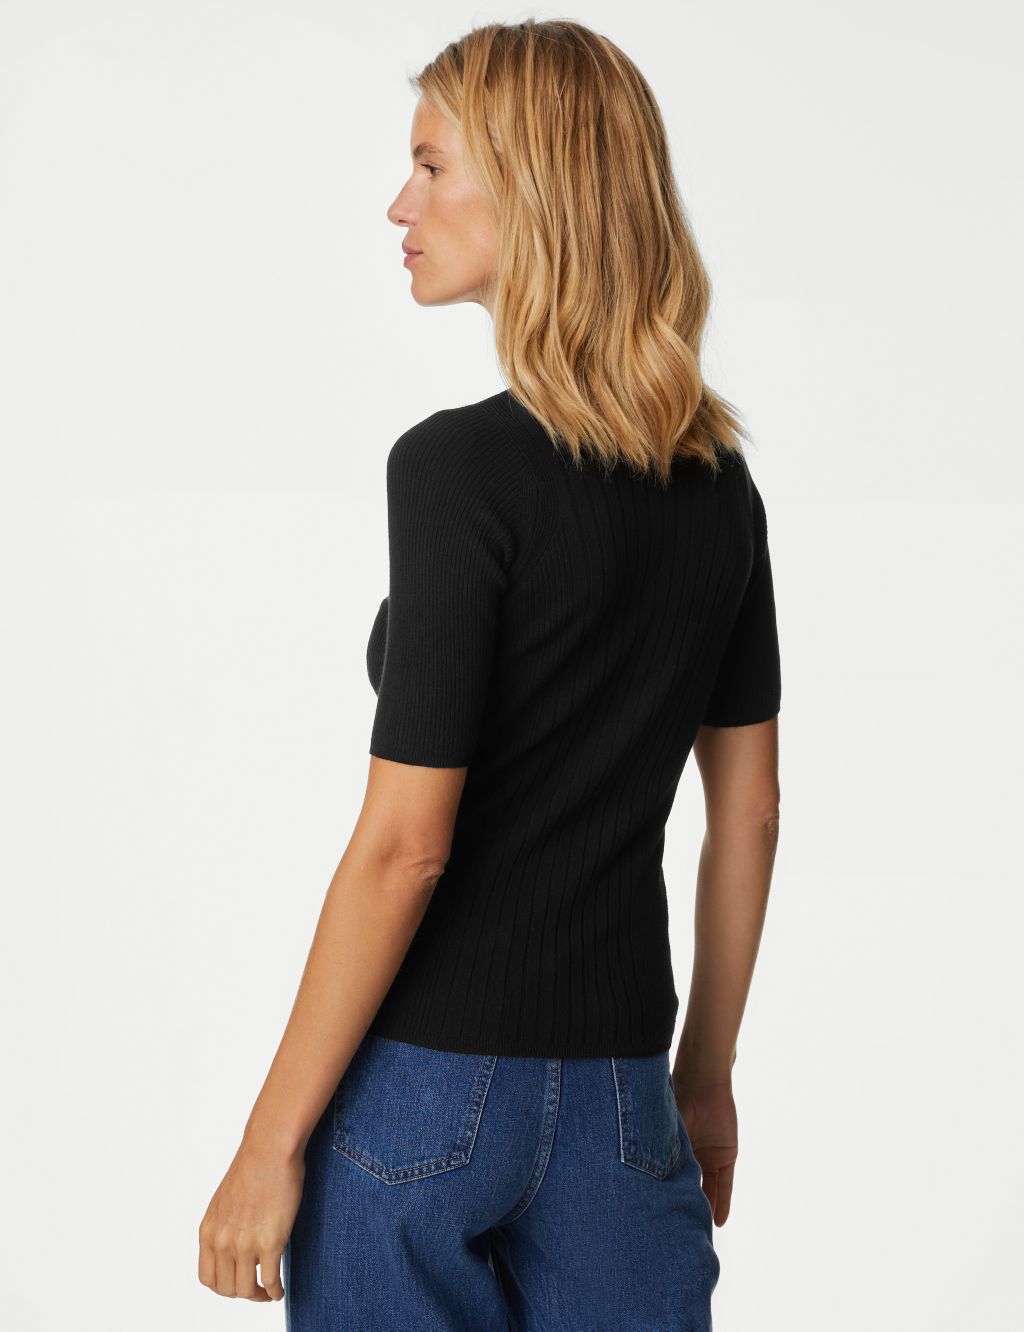 Ribbed Crew Neck Knitted Top image 5